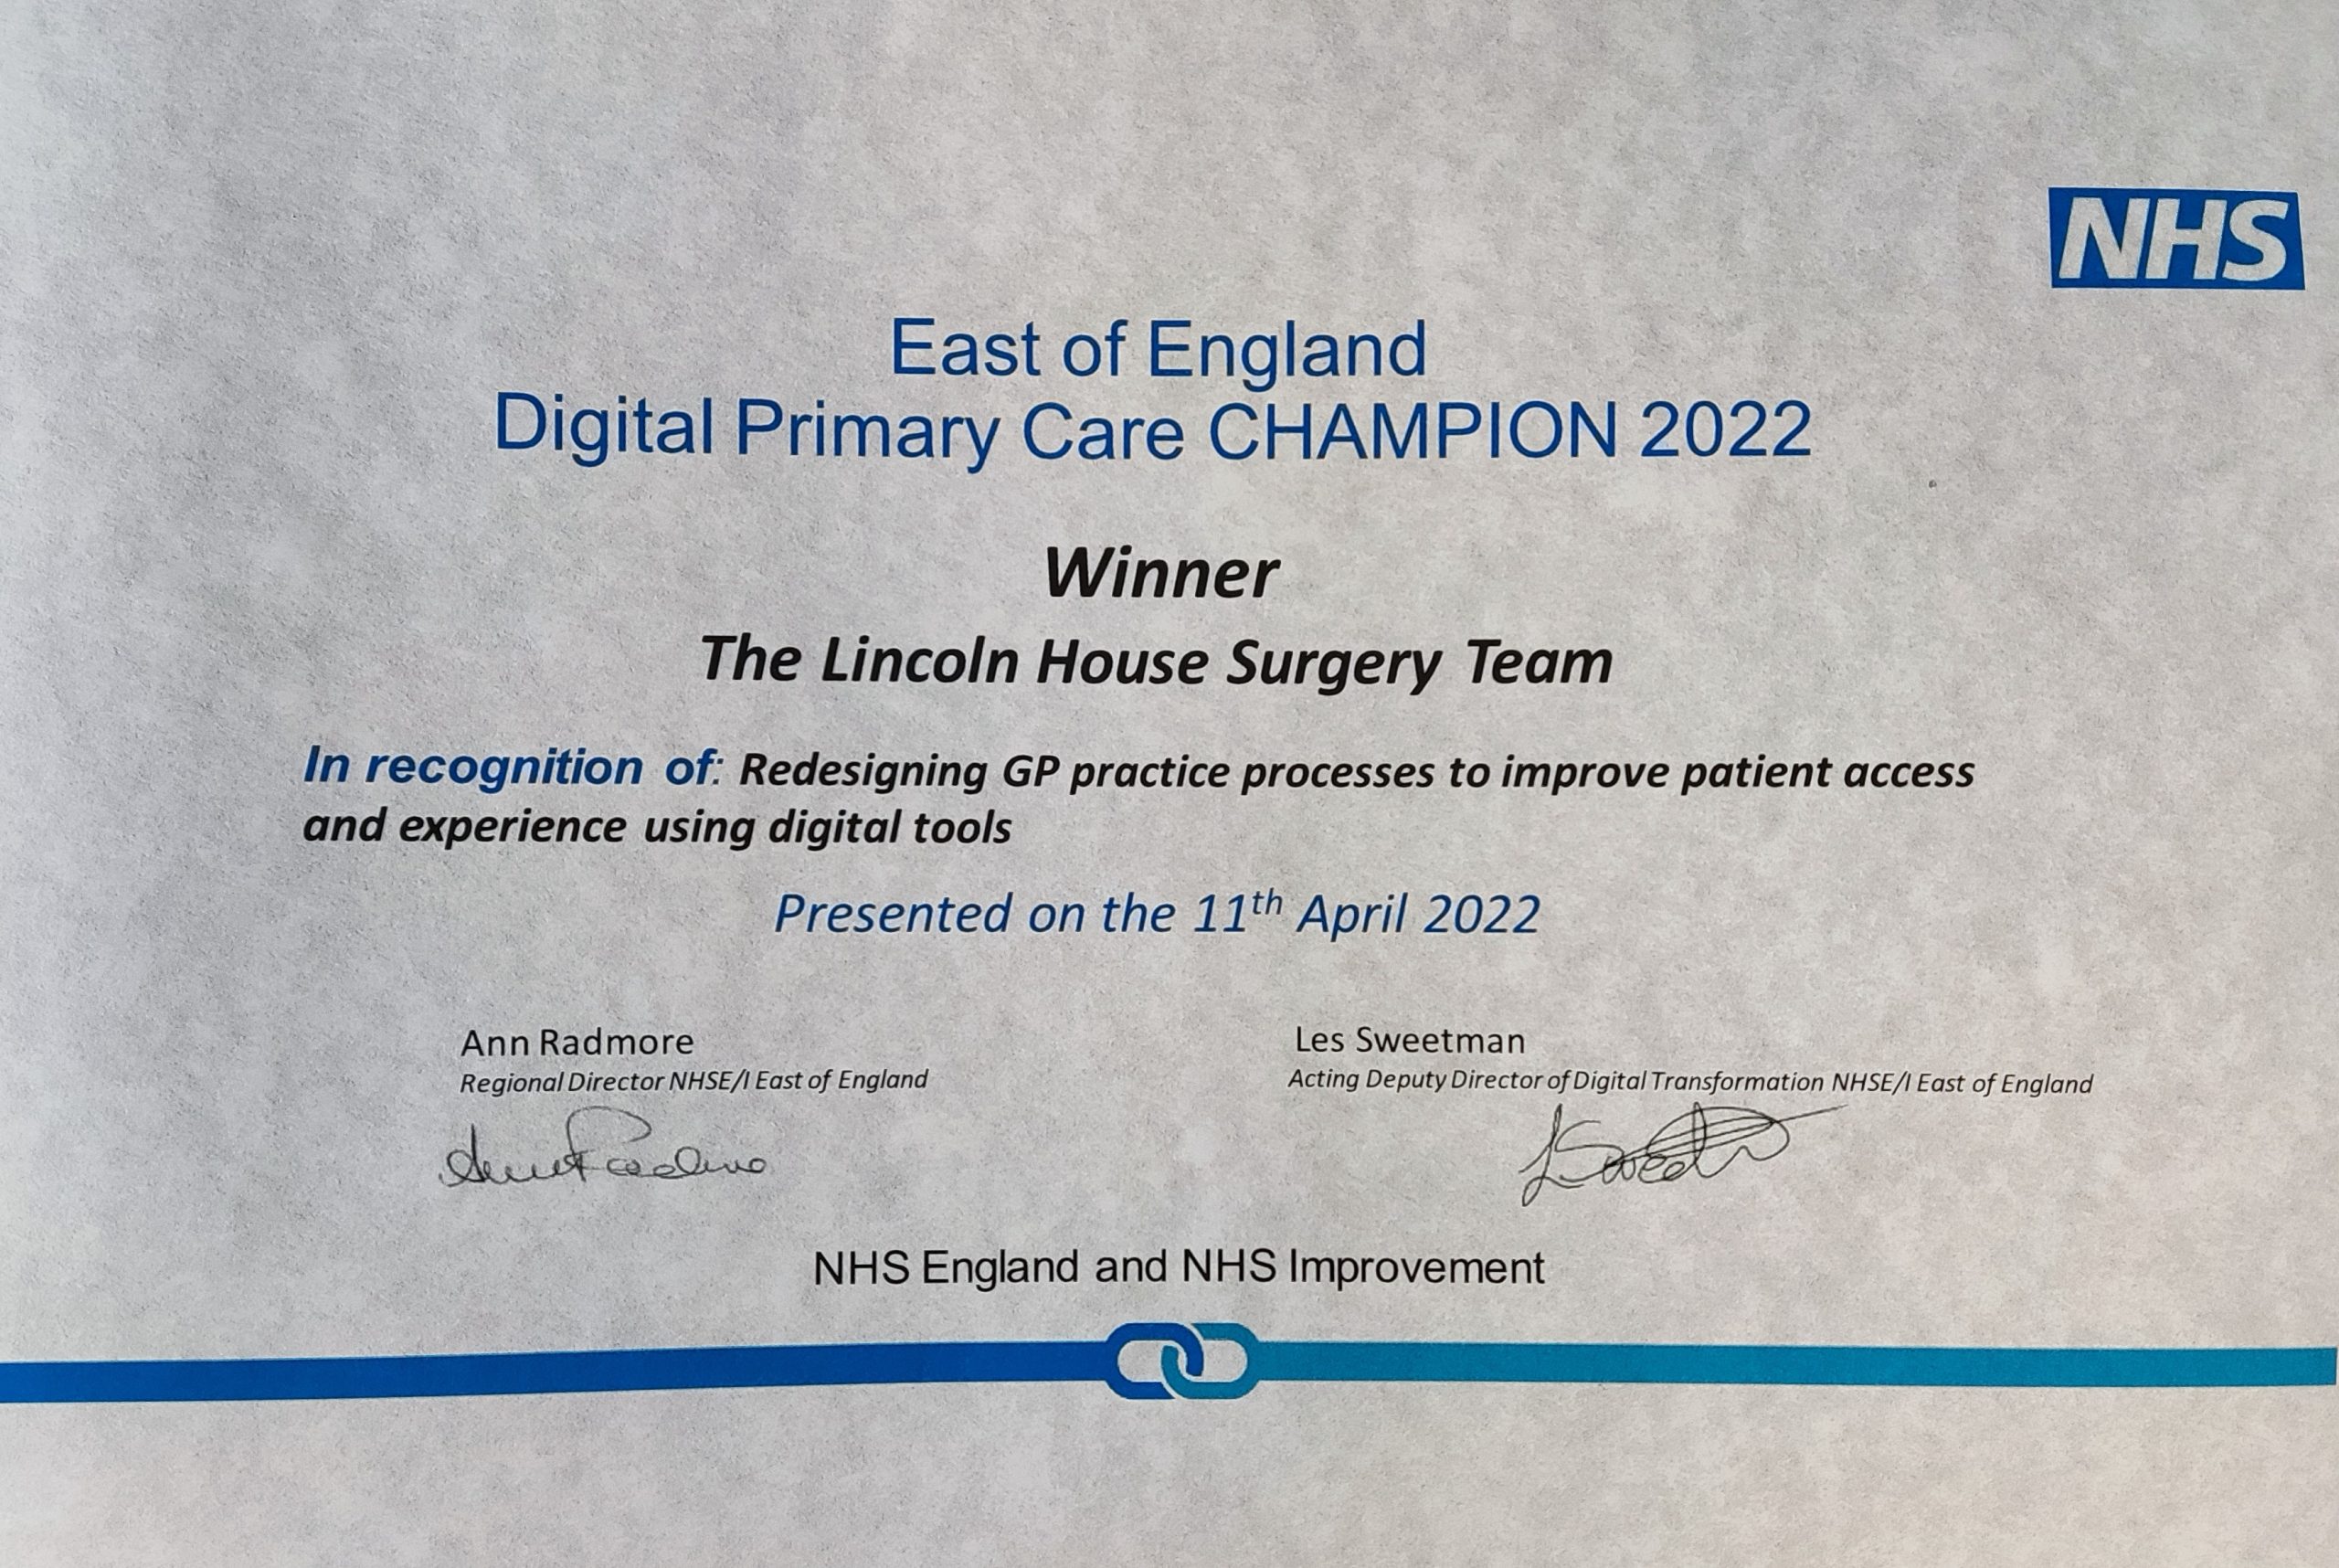 East of England Digital Primary Care CHAMPION 2022